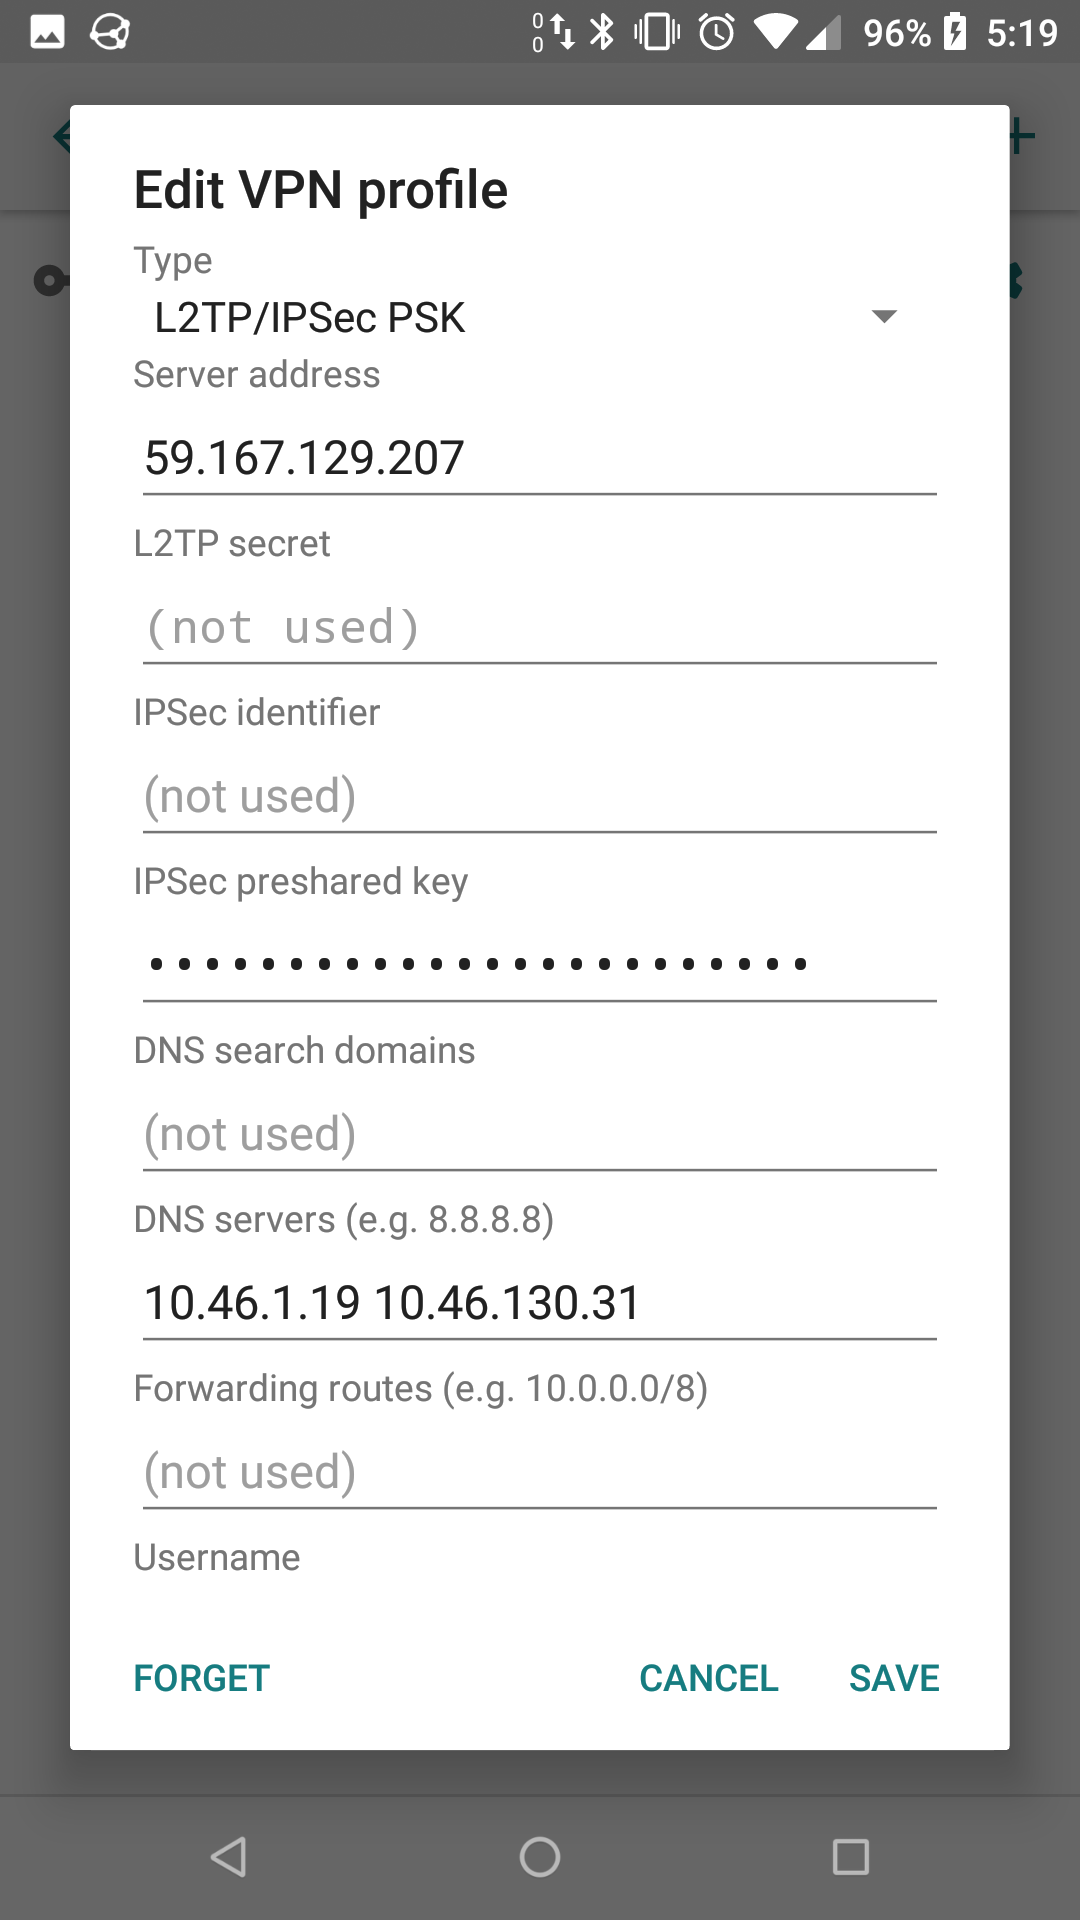 VPN Connection Details in Android